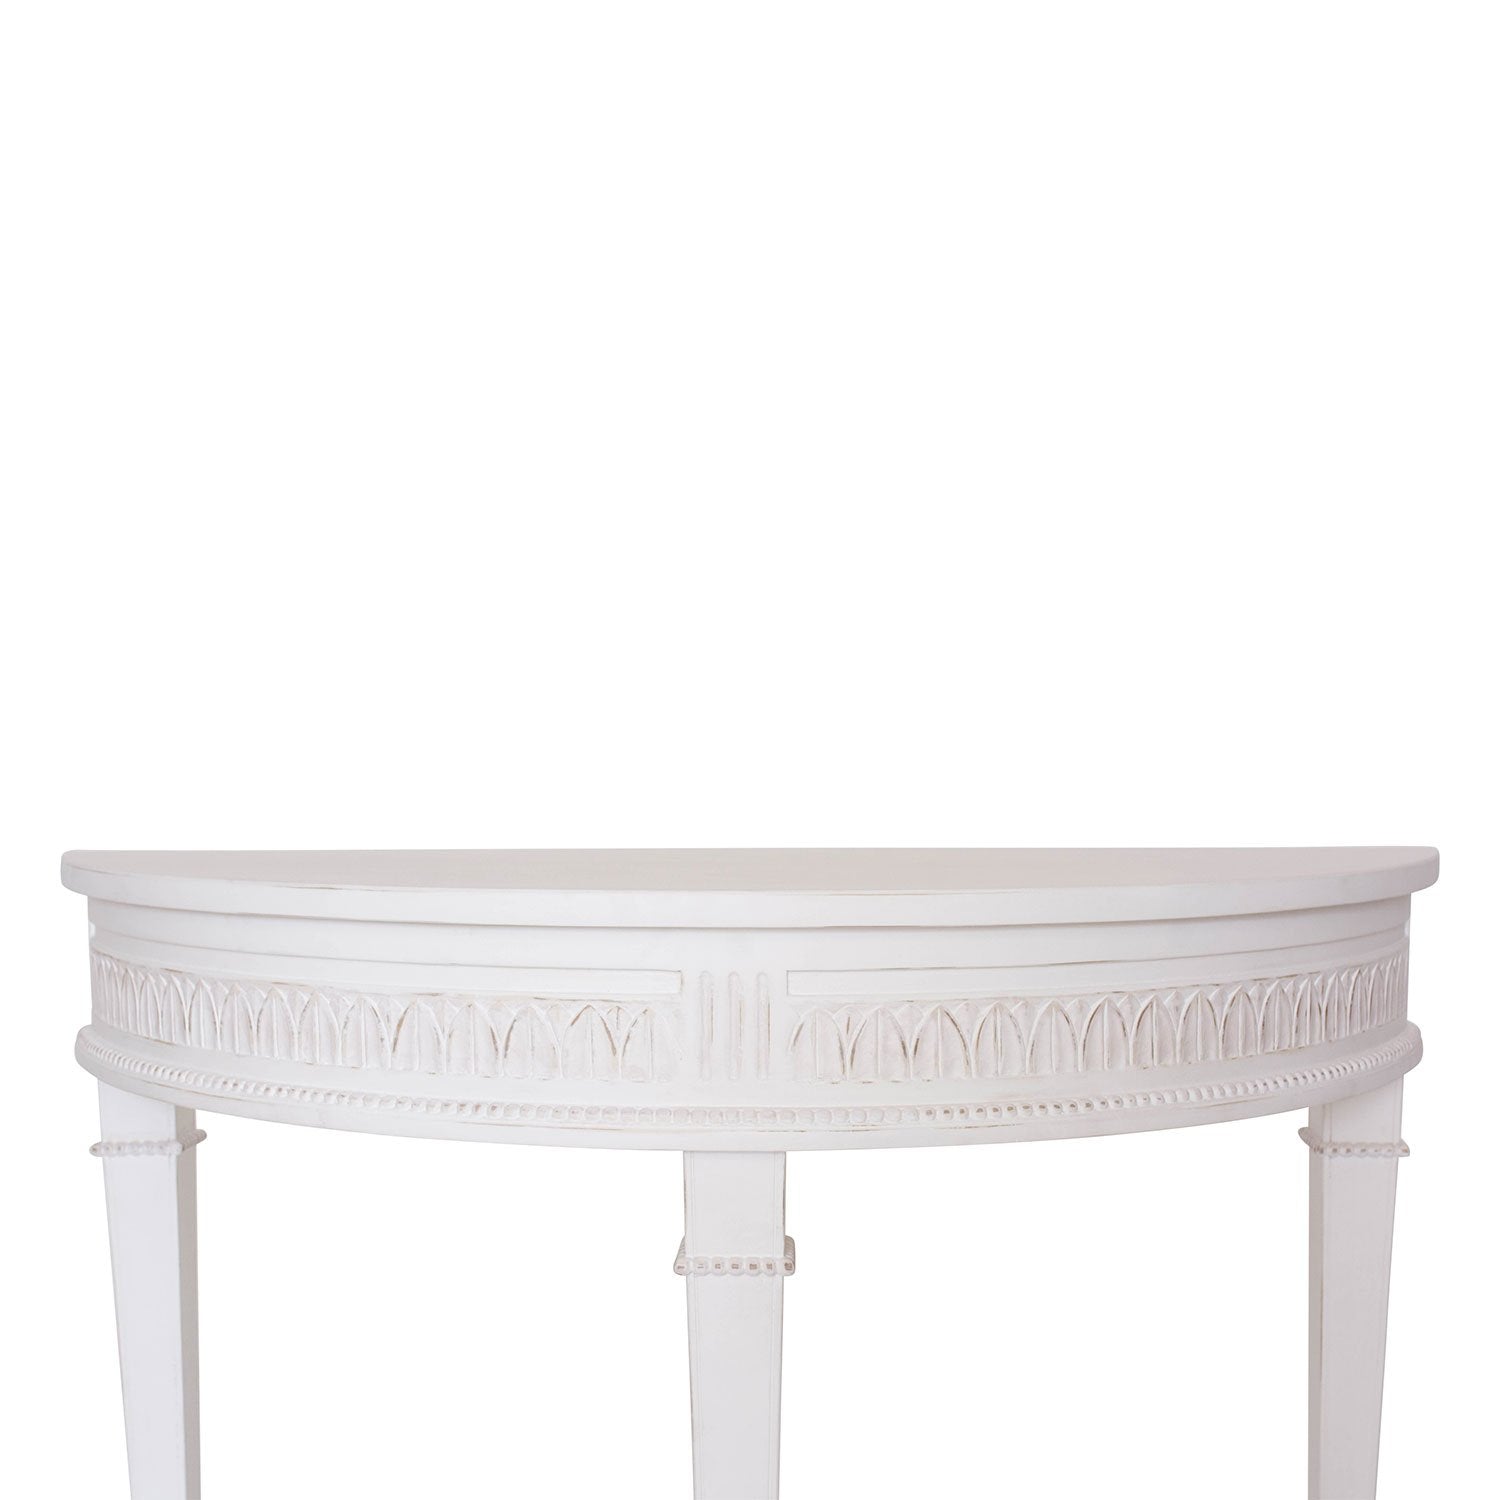 Carved Details on Camilla Demilune Accent Table in White